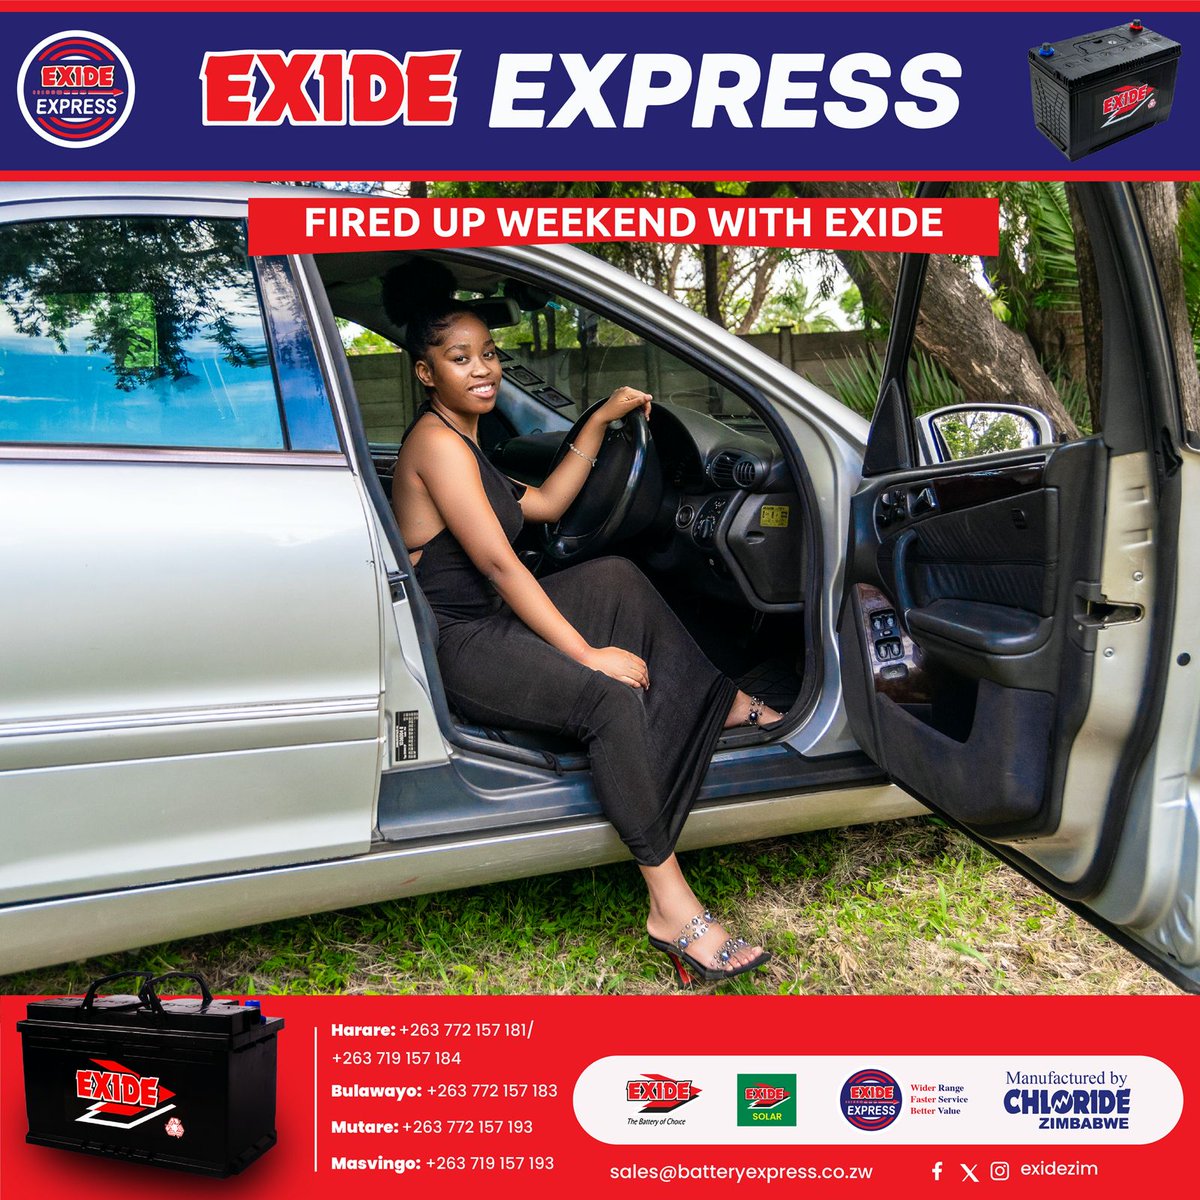 Weekends are more enjoyable when your car is powered by Exide. Choose convenience, buy the Exide battery and enjoy the real power. #exidebatteries #thebatteryofchoice #triedandtested @KUDZIELISTER2 @Mavhure @alickmacheso3 @EsteemComms @takemorem1 @IdeasZaka